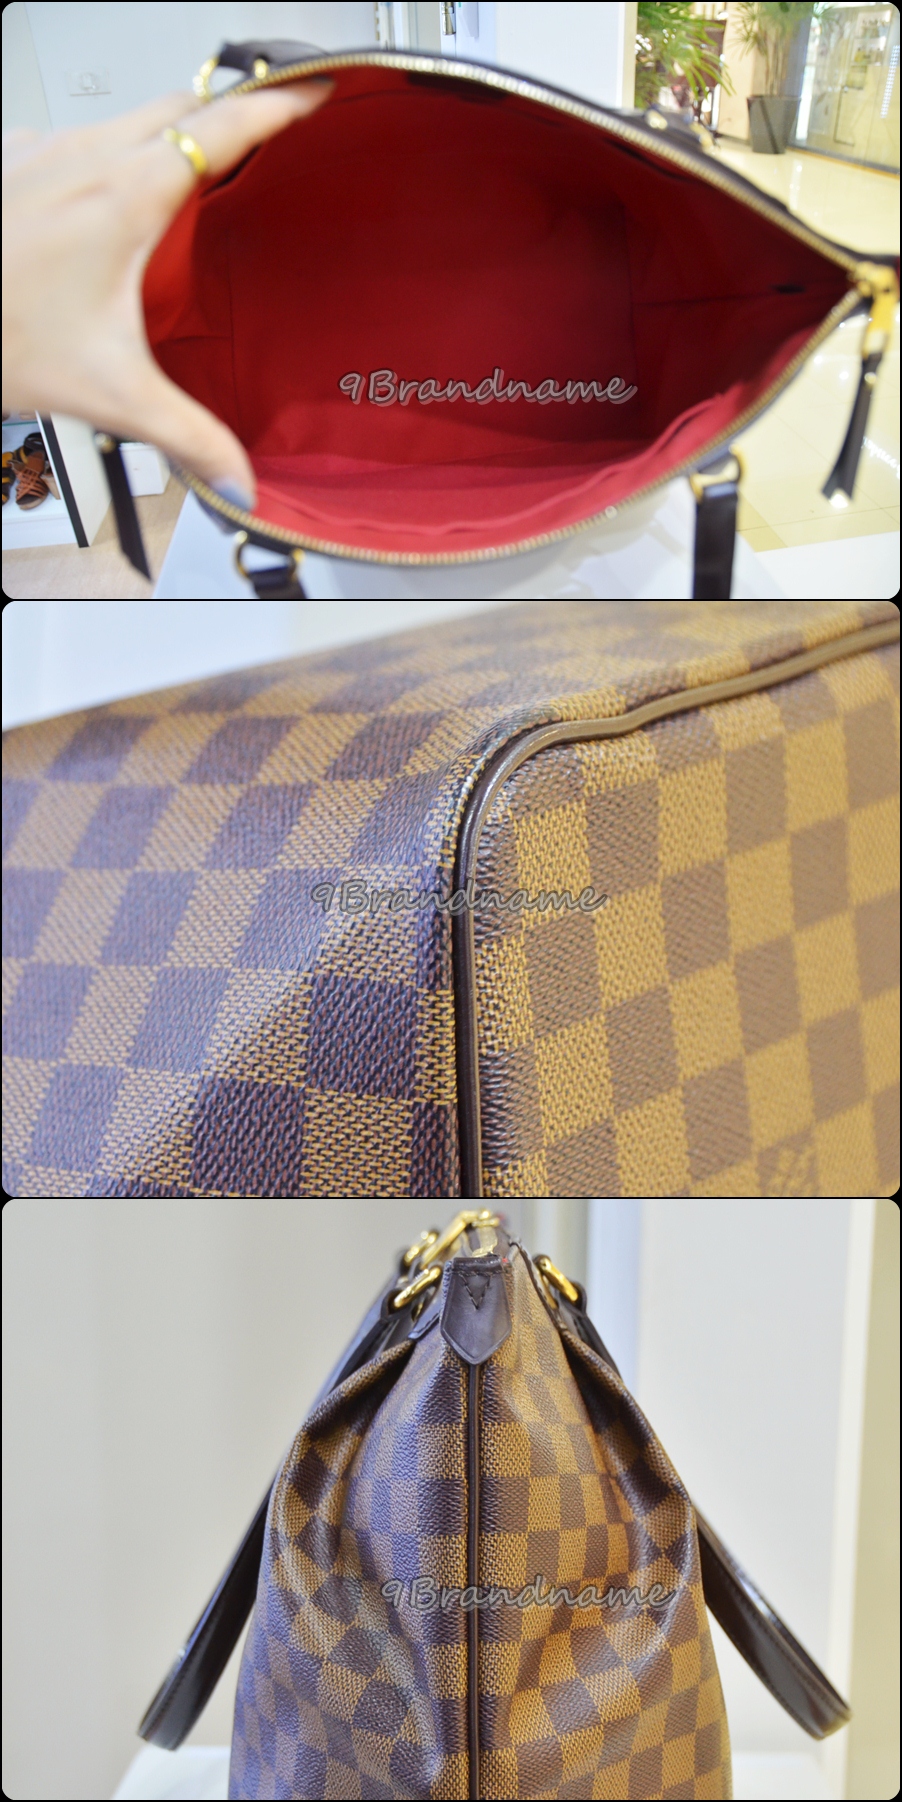 Louis Vuitton Westminster PM Damier Ebene - Used Authentic Bag - 9brandname